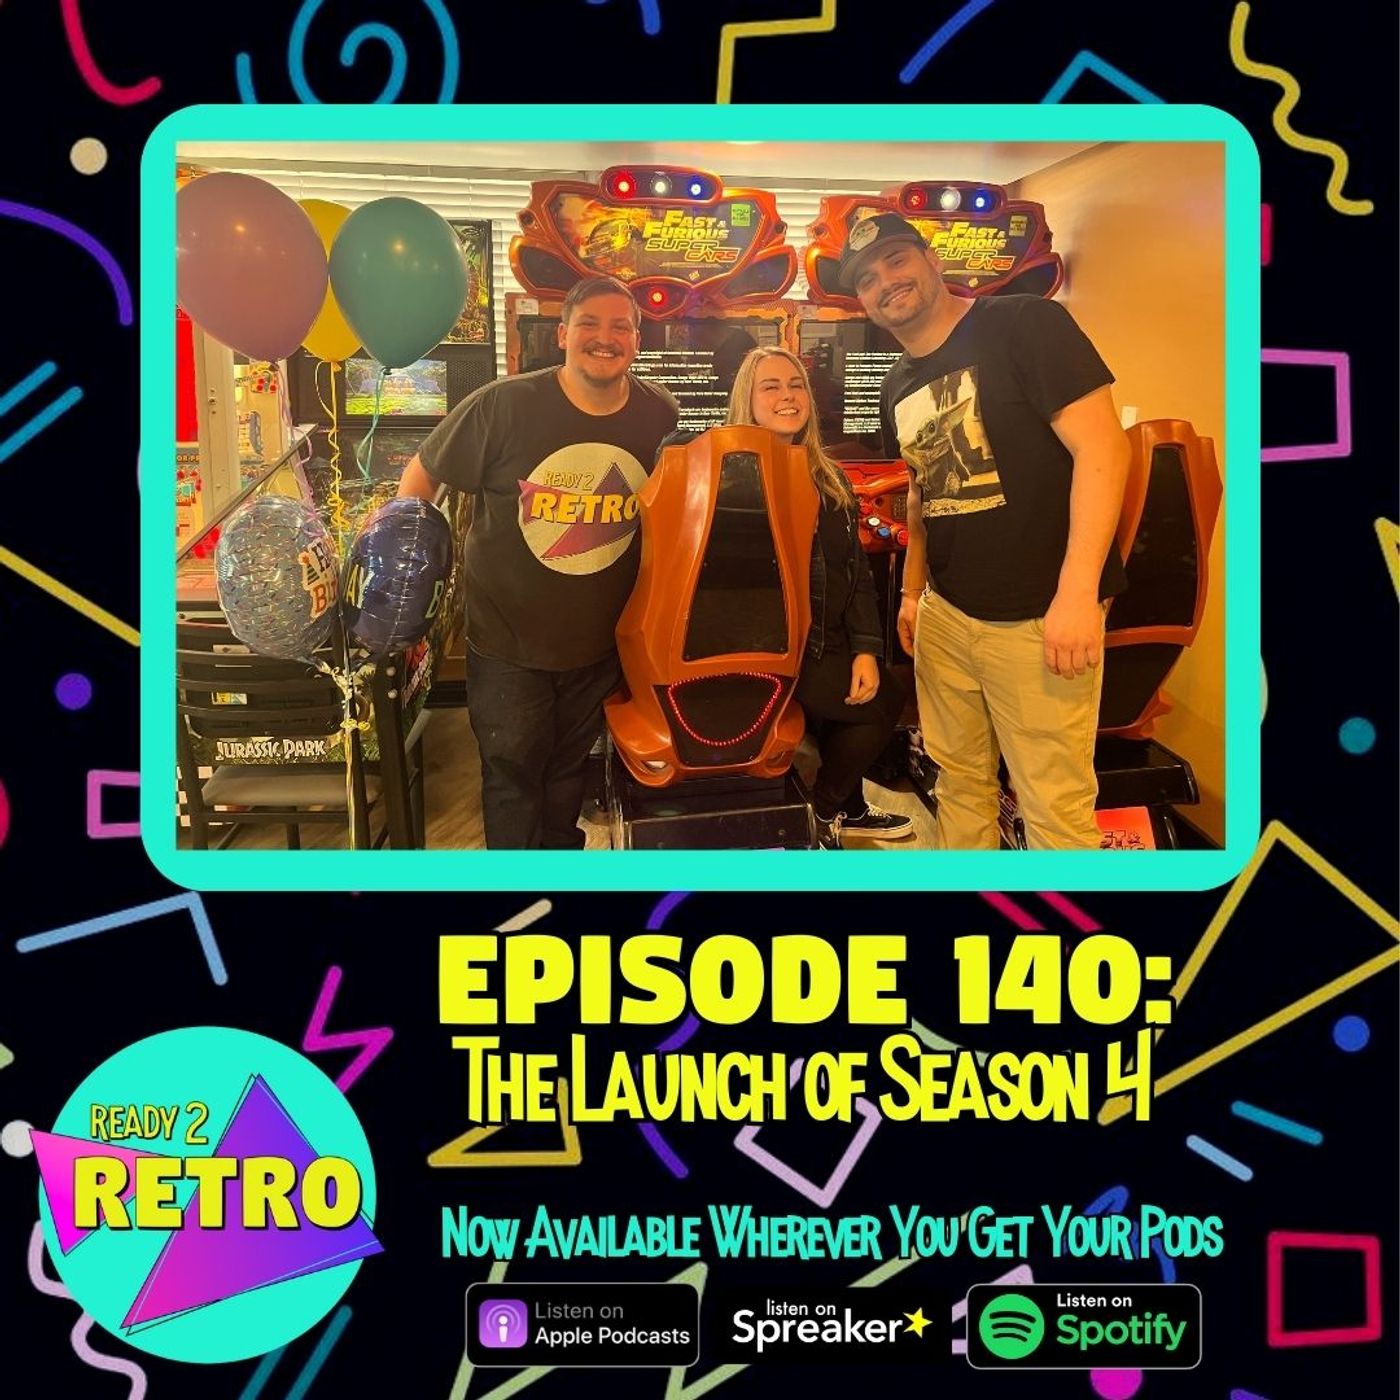 Episode 140: ”The Launch of Season 4”